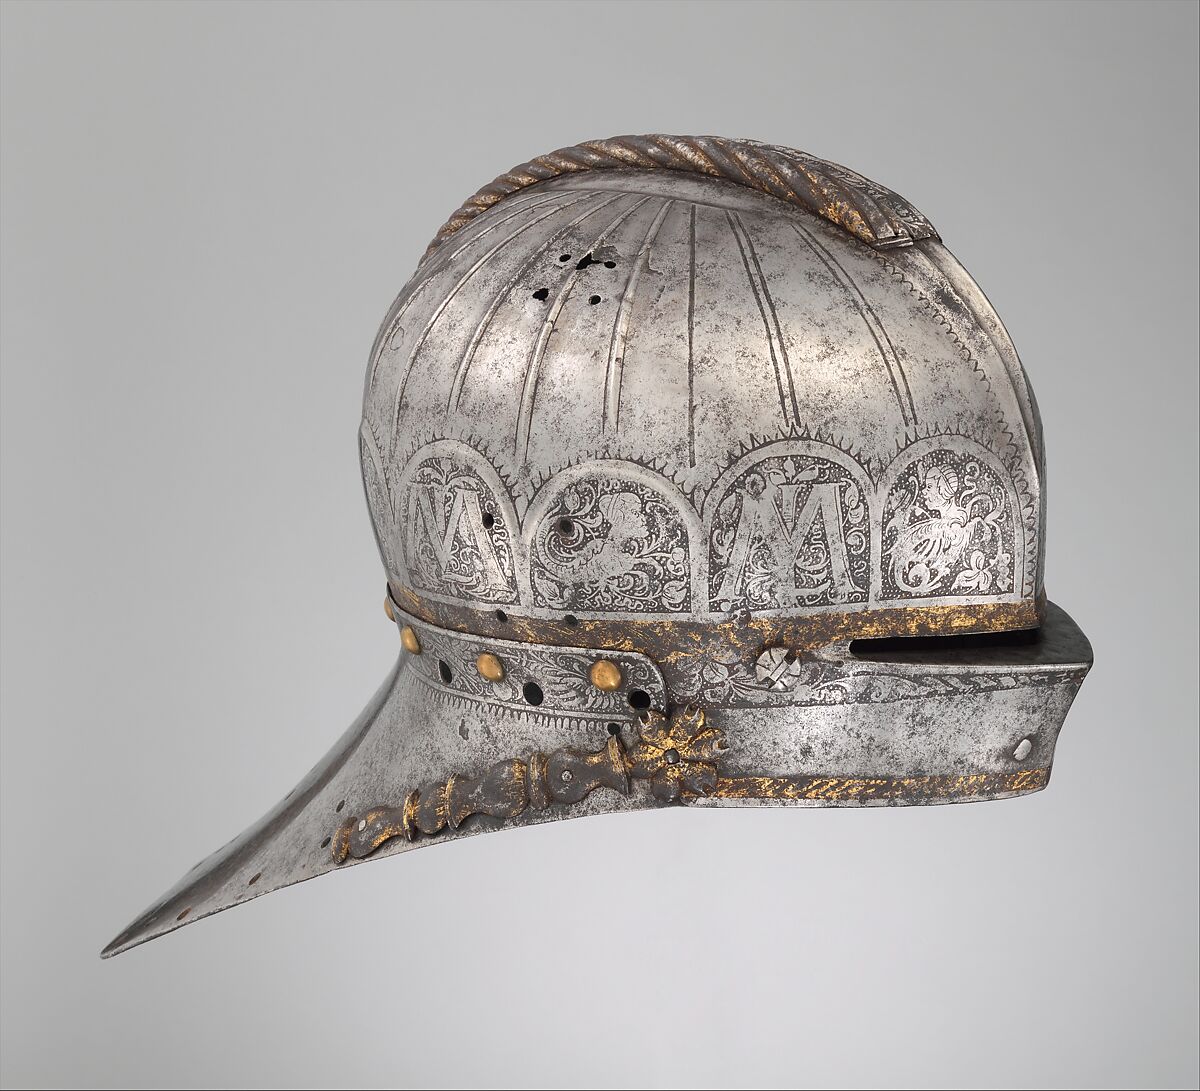 Jousting Sallet (<i>Rennhut</i>) Made for Louis II (1506–1526), King of Hungary and Bohemia, Attributed to Kolman Helmschmid (German, Augsburg 1471–1532), Steel, copper alloy, gold, German, Augsburg 